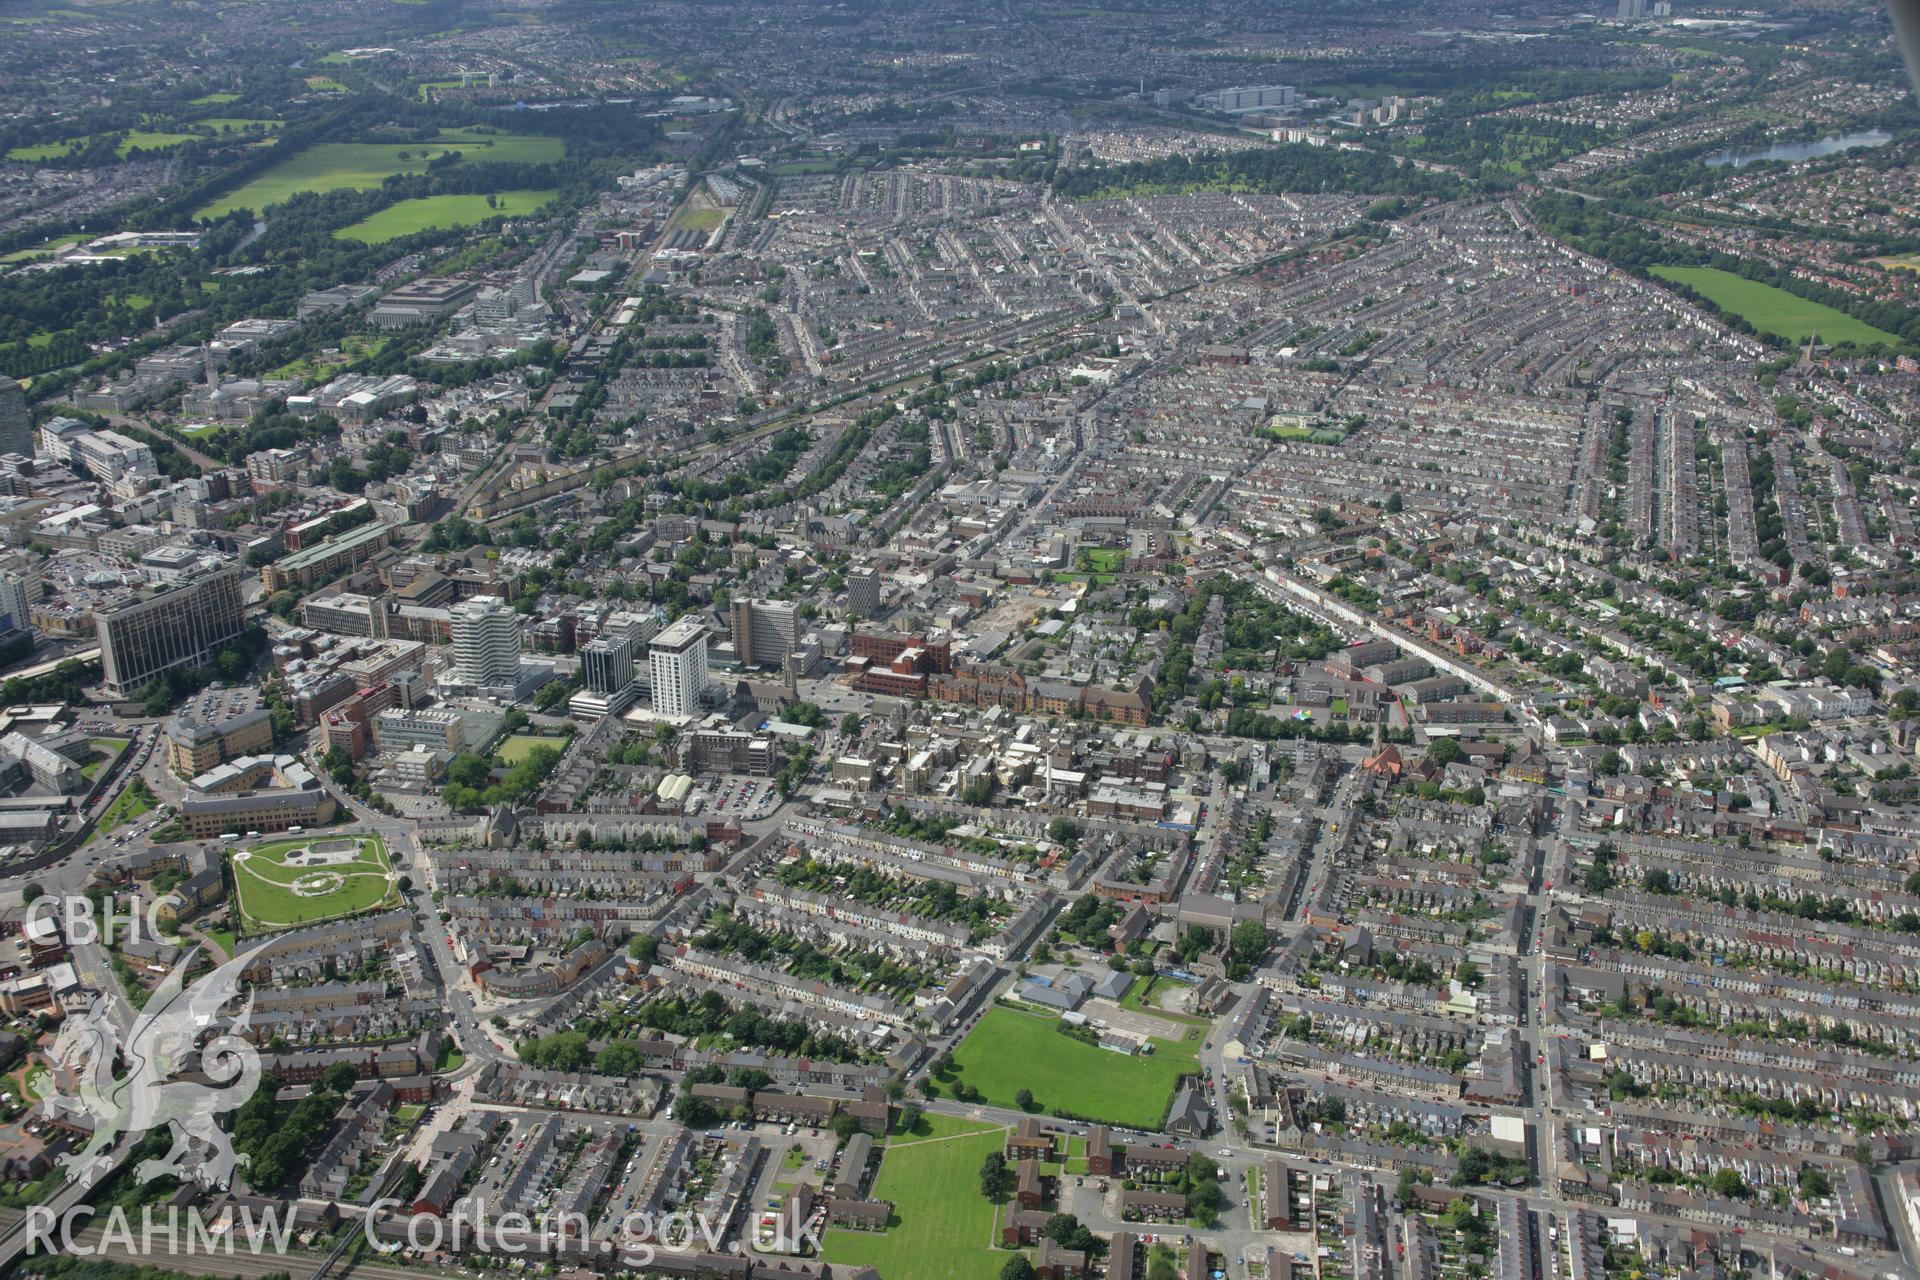 RCAHMW colour oblique aerial photograph of Cardiff. The city centre and Newport road from the south-east. Taken on 30 July 2007 by Toby Driver